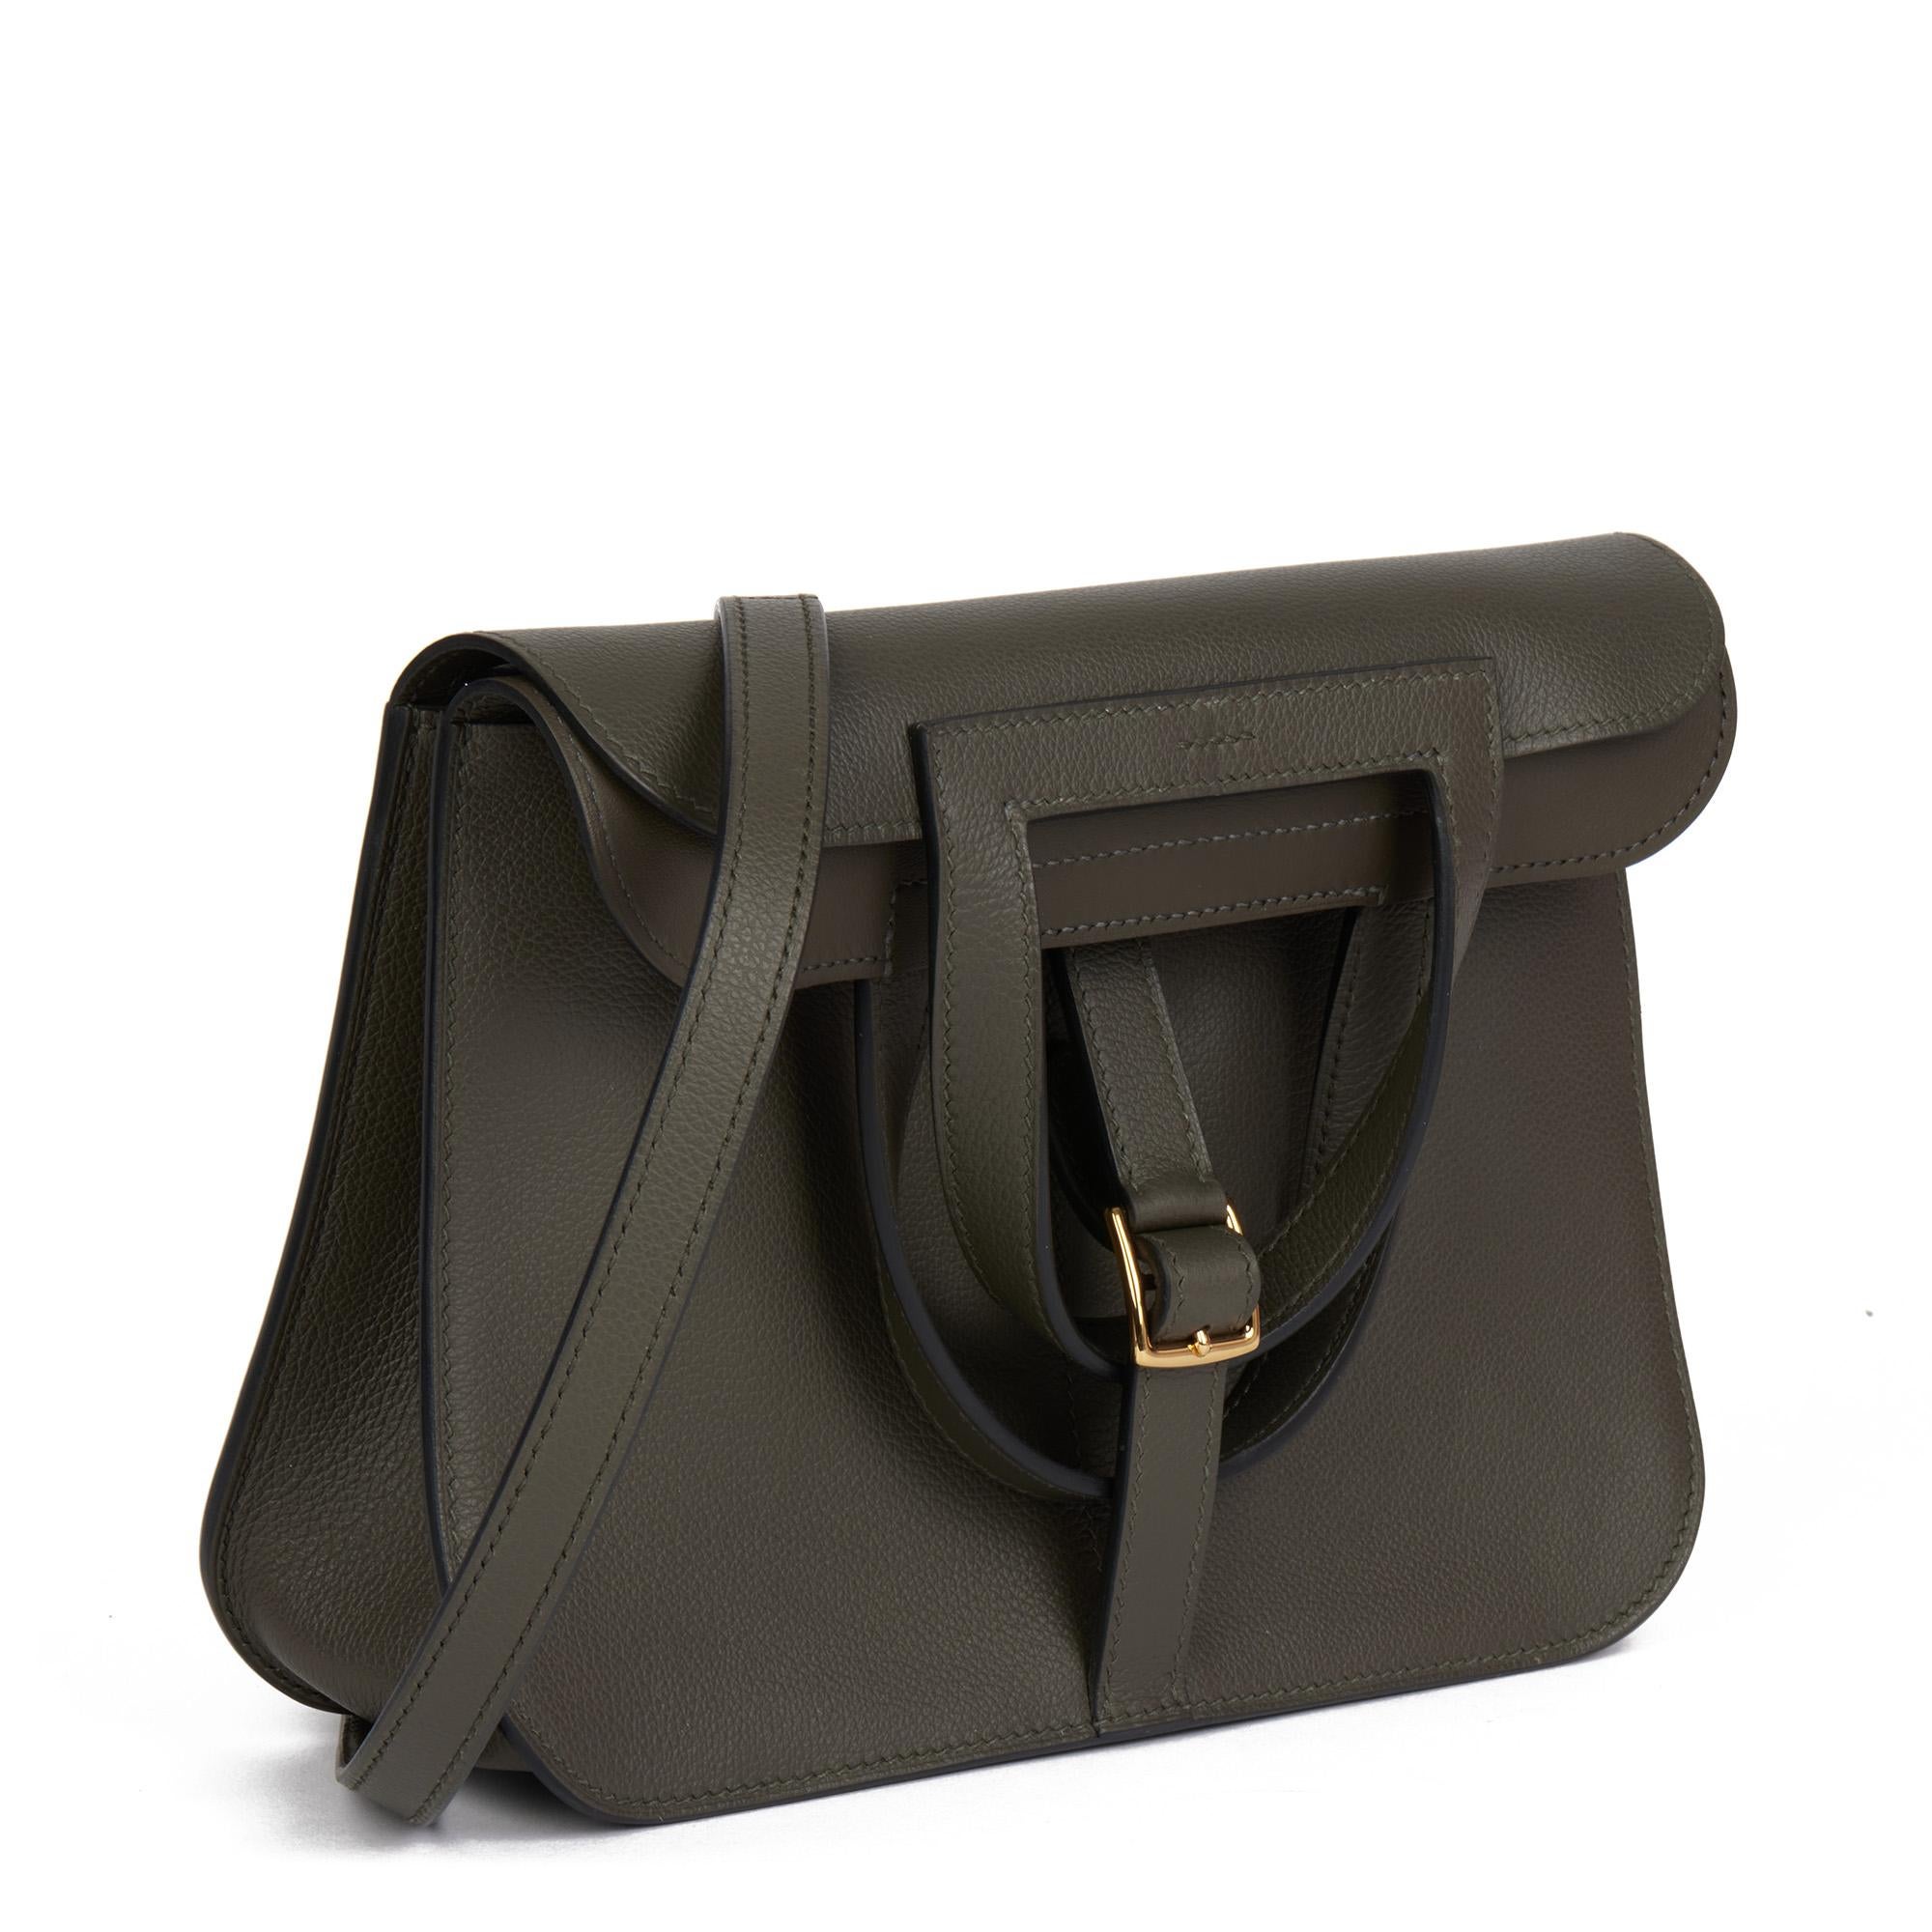 HERMÈS
Vert de Gris Evercolour Leather Halzan 25

Xupes Reference: HB4496
Serial Number: Y
Age (Circa): 2020
Accompanied By: Hermès Dust Bag, Box, Protective Felt, Selfridges Receipt, Care Booklet
Authenticity Details: Date Stamp (Made in